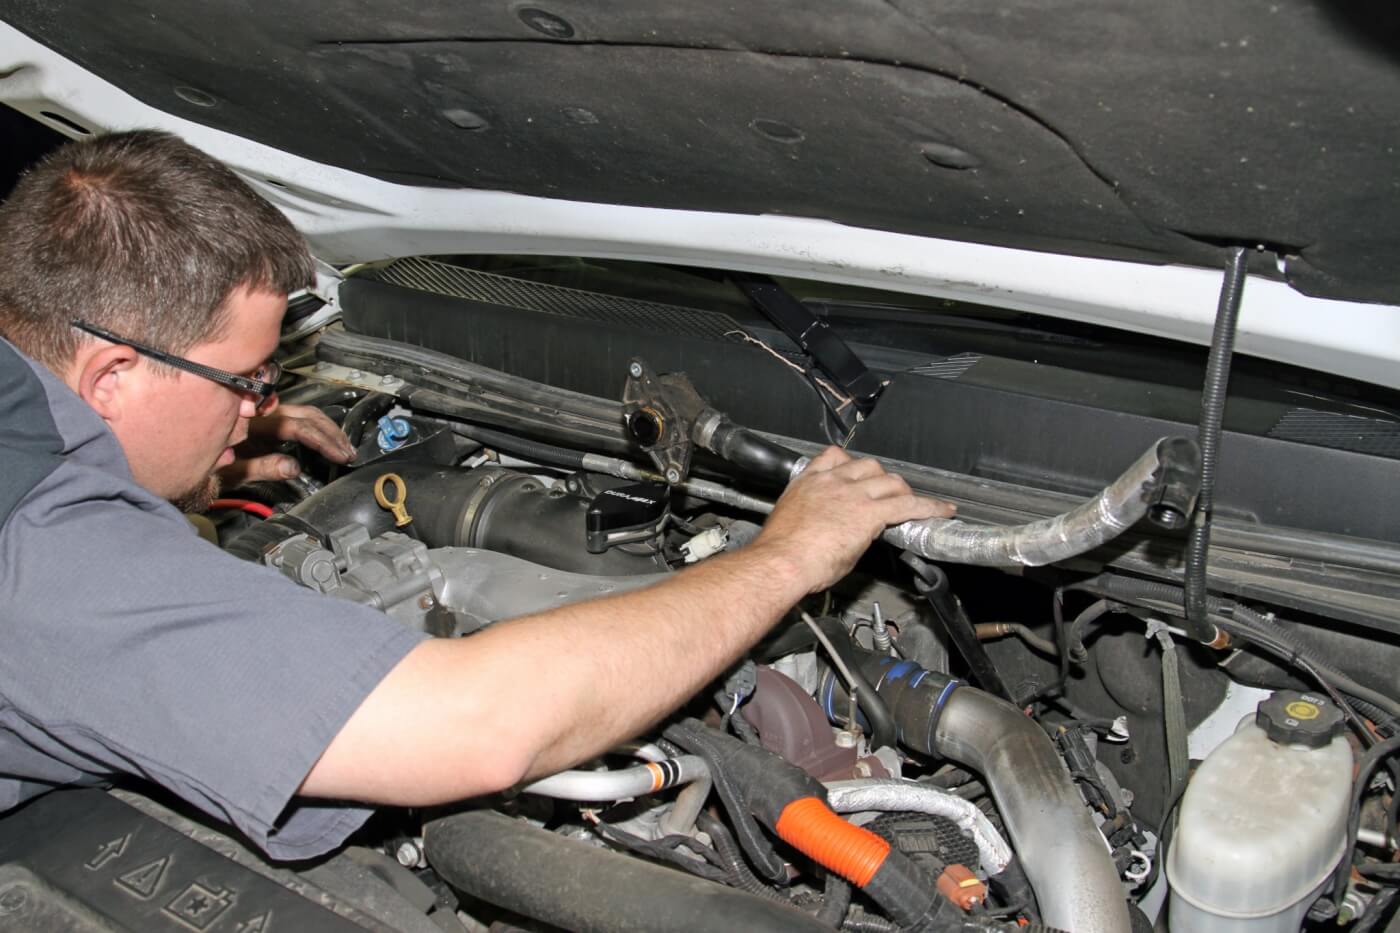 13. Once both bolts are removed, the PCV hose assembly can be lifted out of the engine bay.